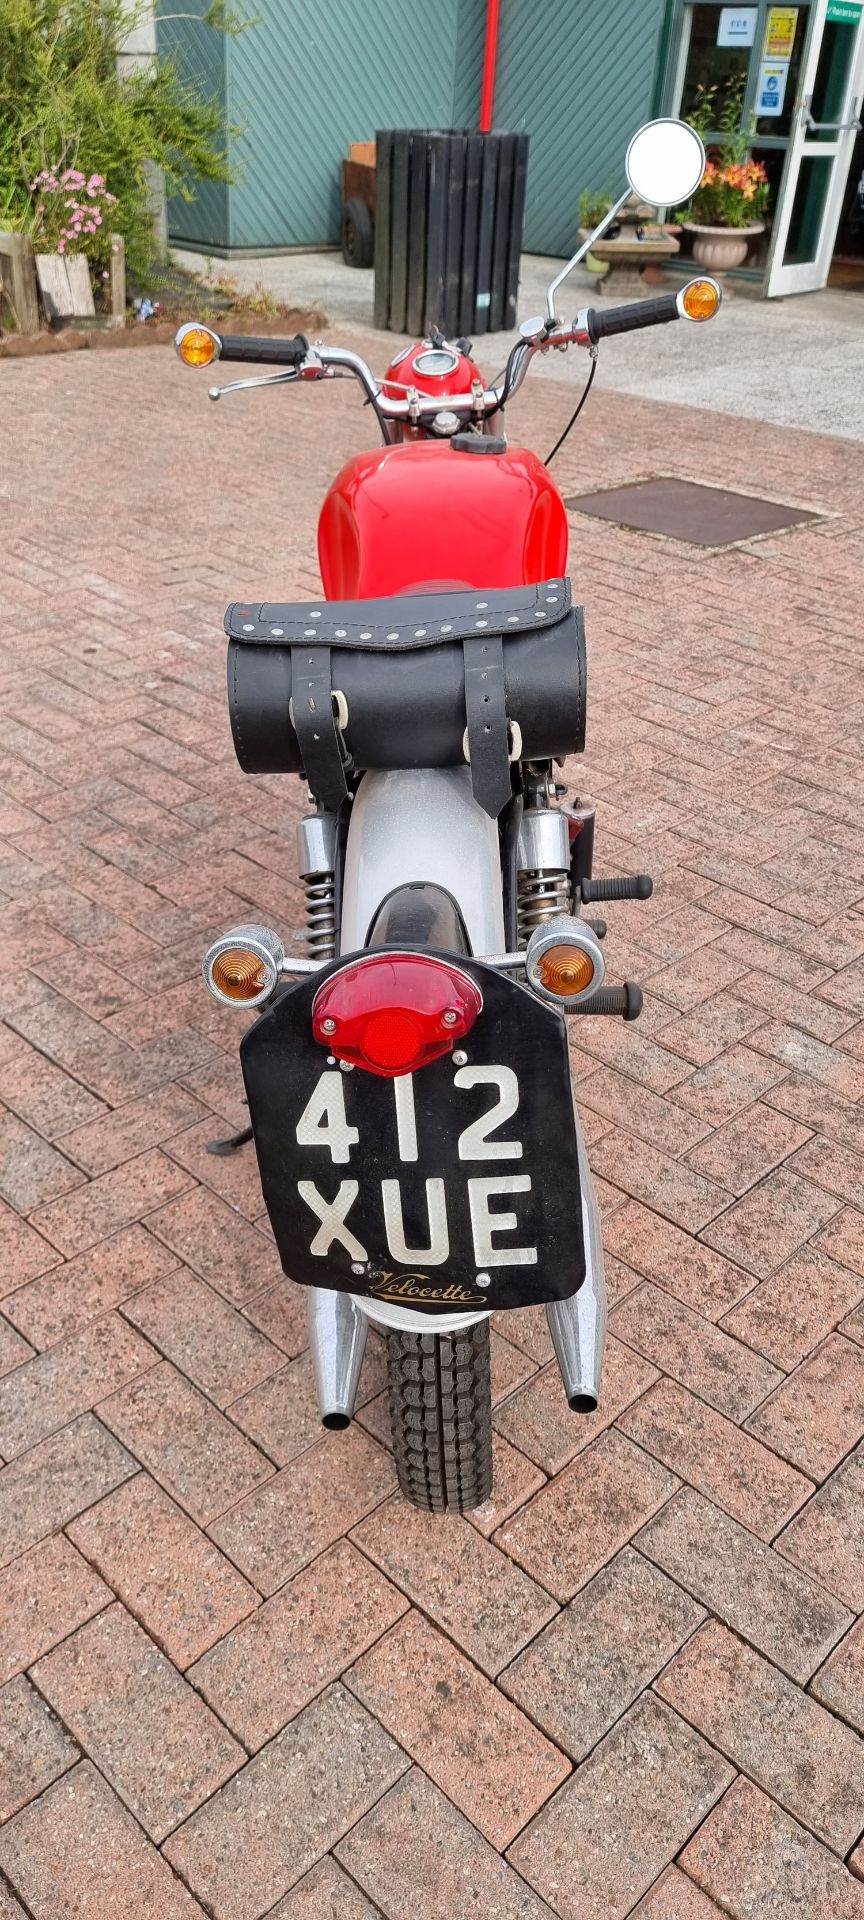 1957 Velocette LE, 200cc. Registration number 412 XUE (non transferrable). Frame number 200/4399/ - Image 4 of 14